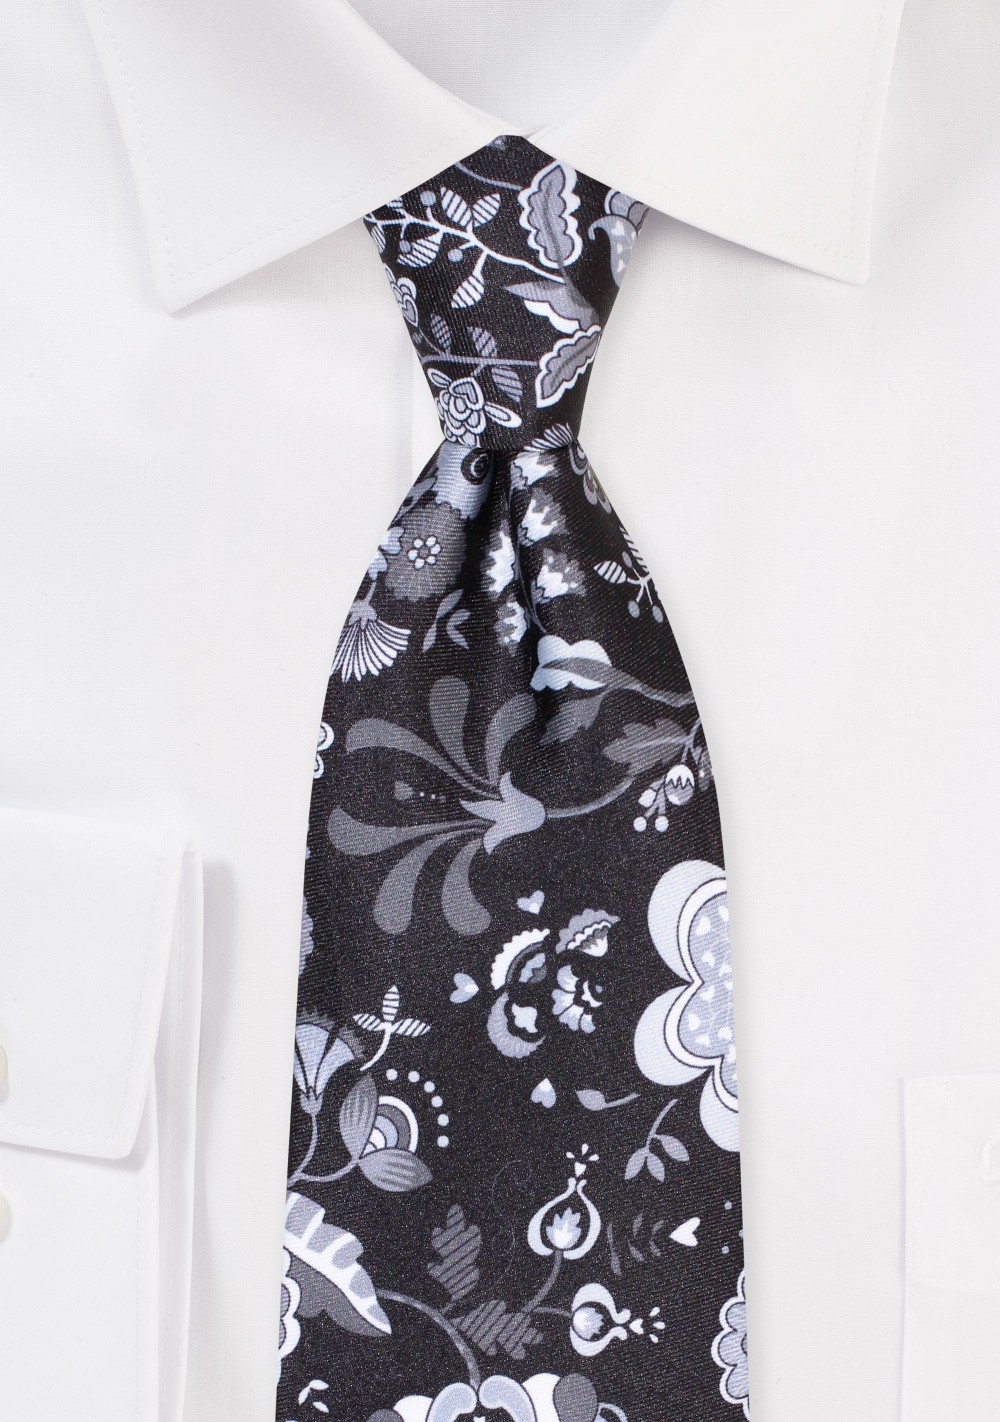 Black, Silver, and Gray Floral Print Tie